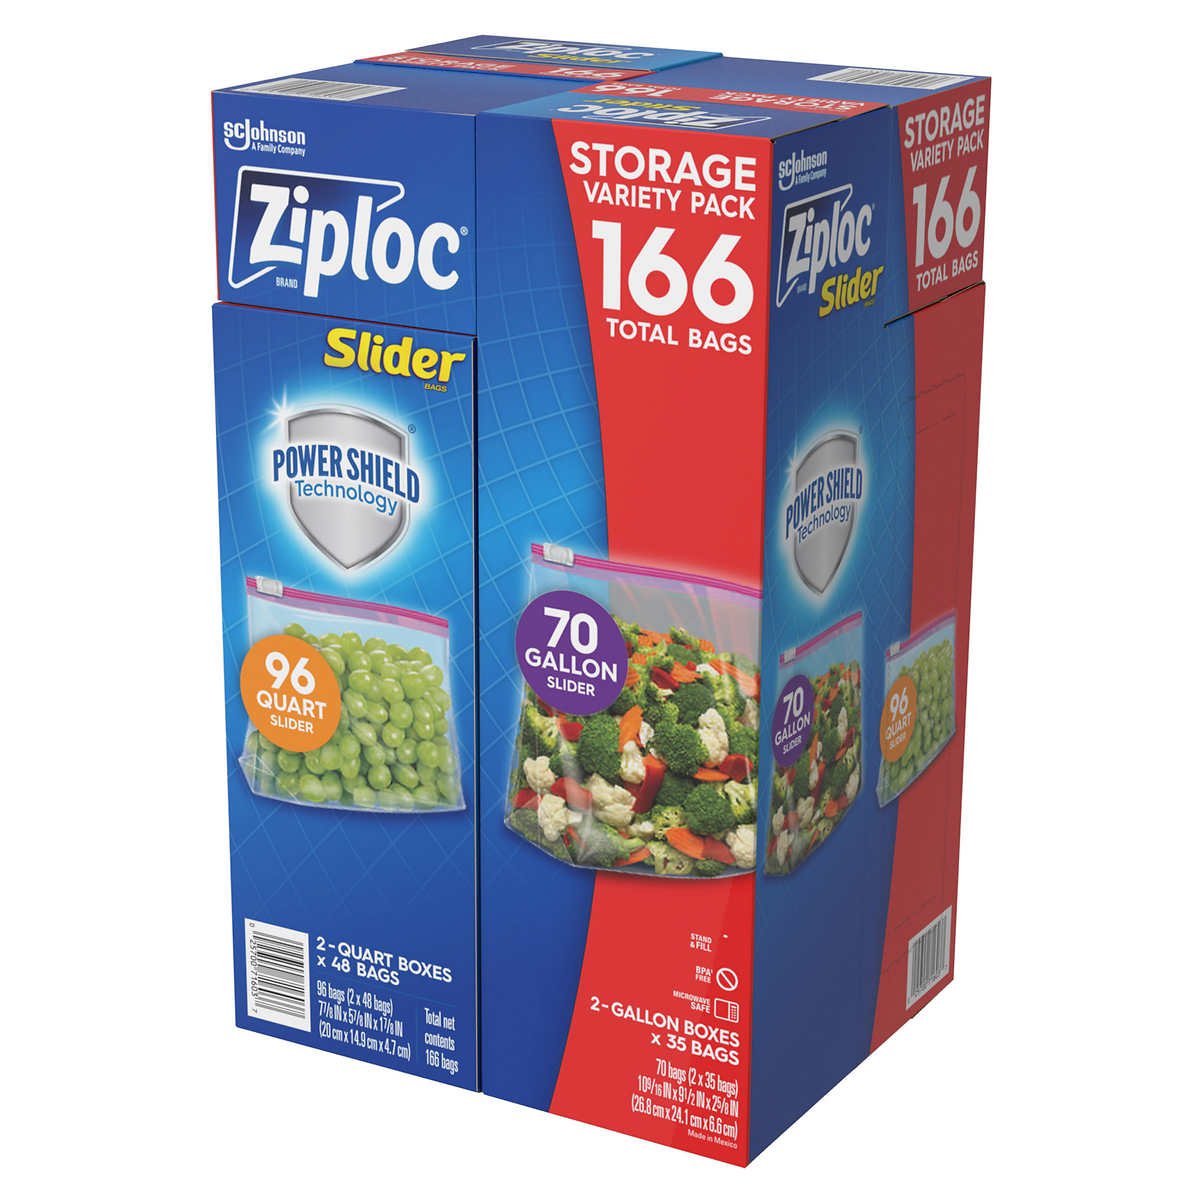 Ziploc Quart Food Storage Slider Bags Power Shield Technology for More Durability 40 Count Pack of 4 (160 Total Bags)